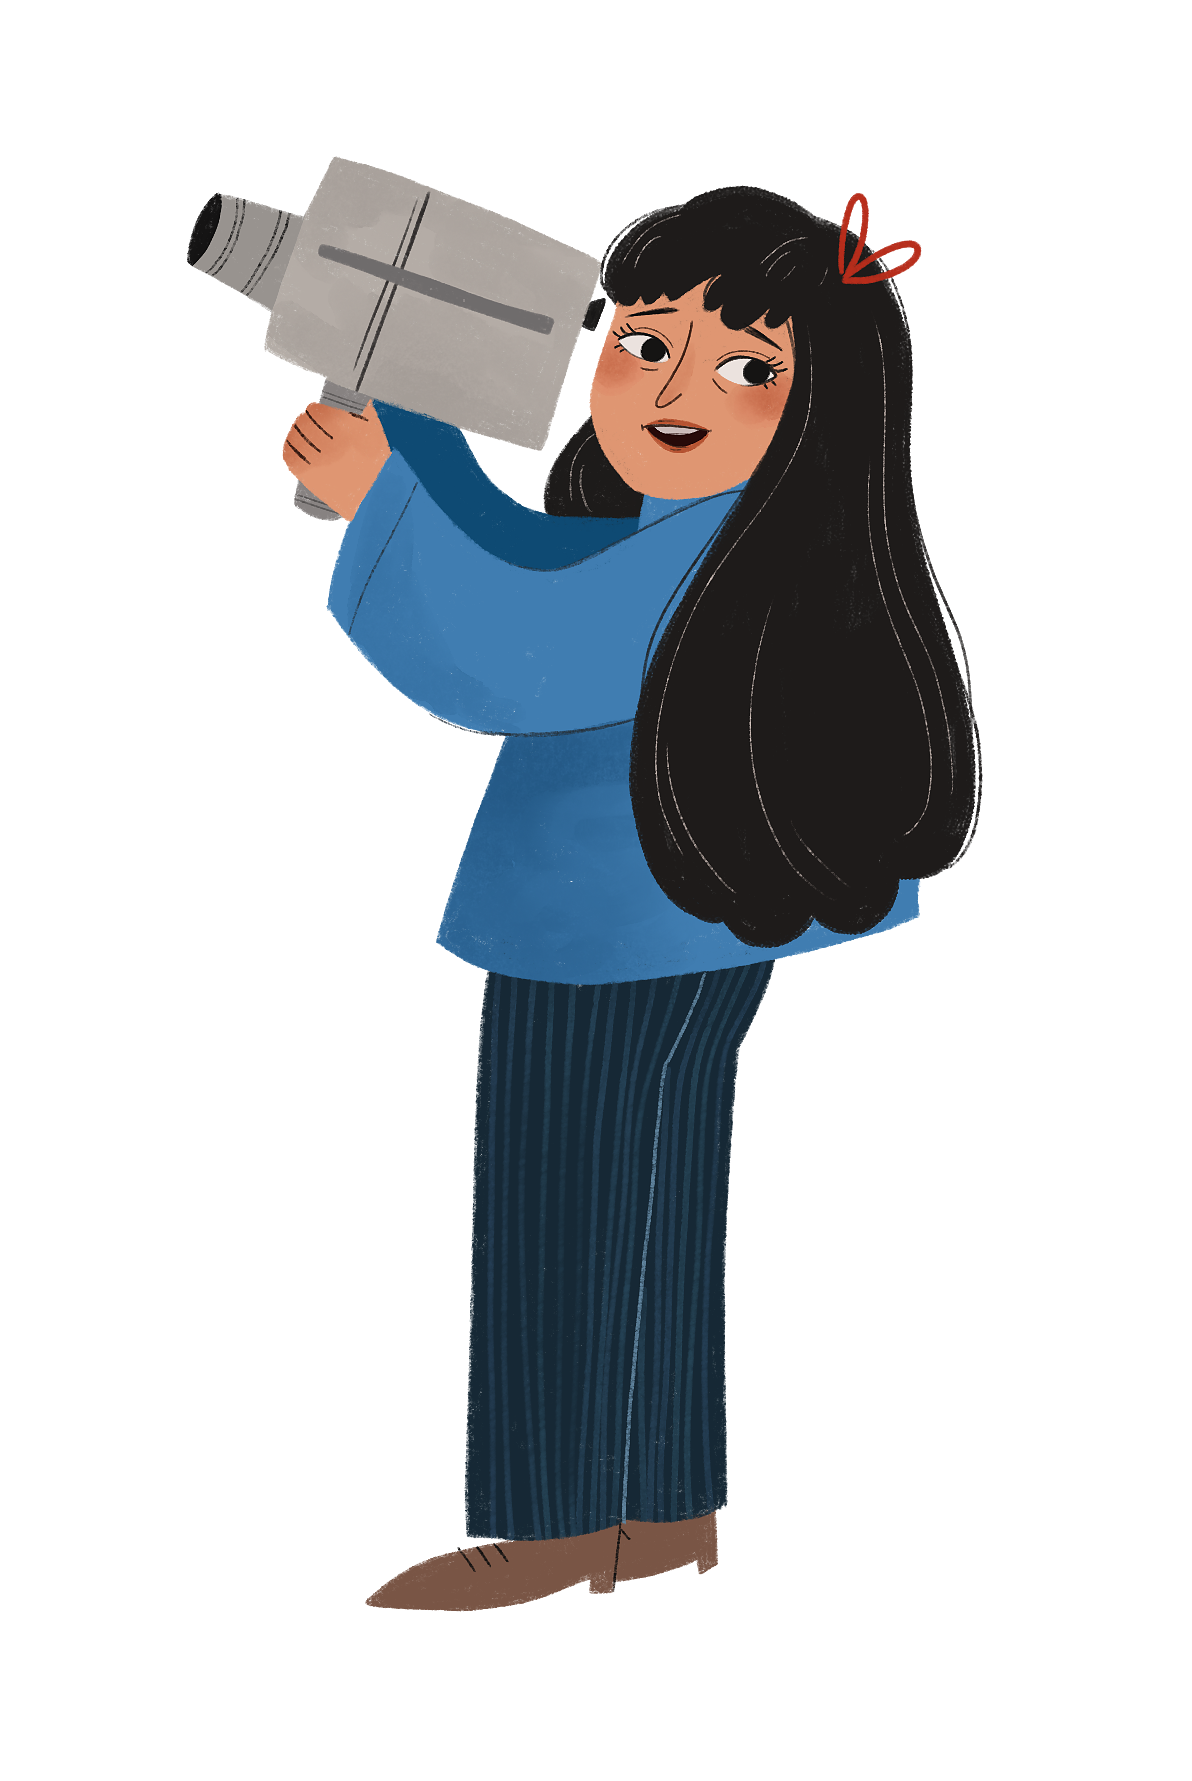 Illustration of girl with black hair and blue sweater holding a videocamera